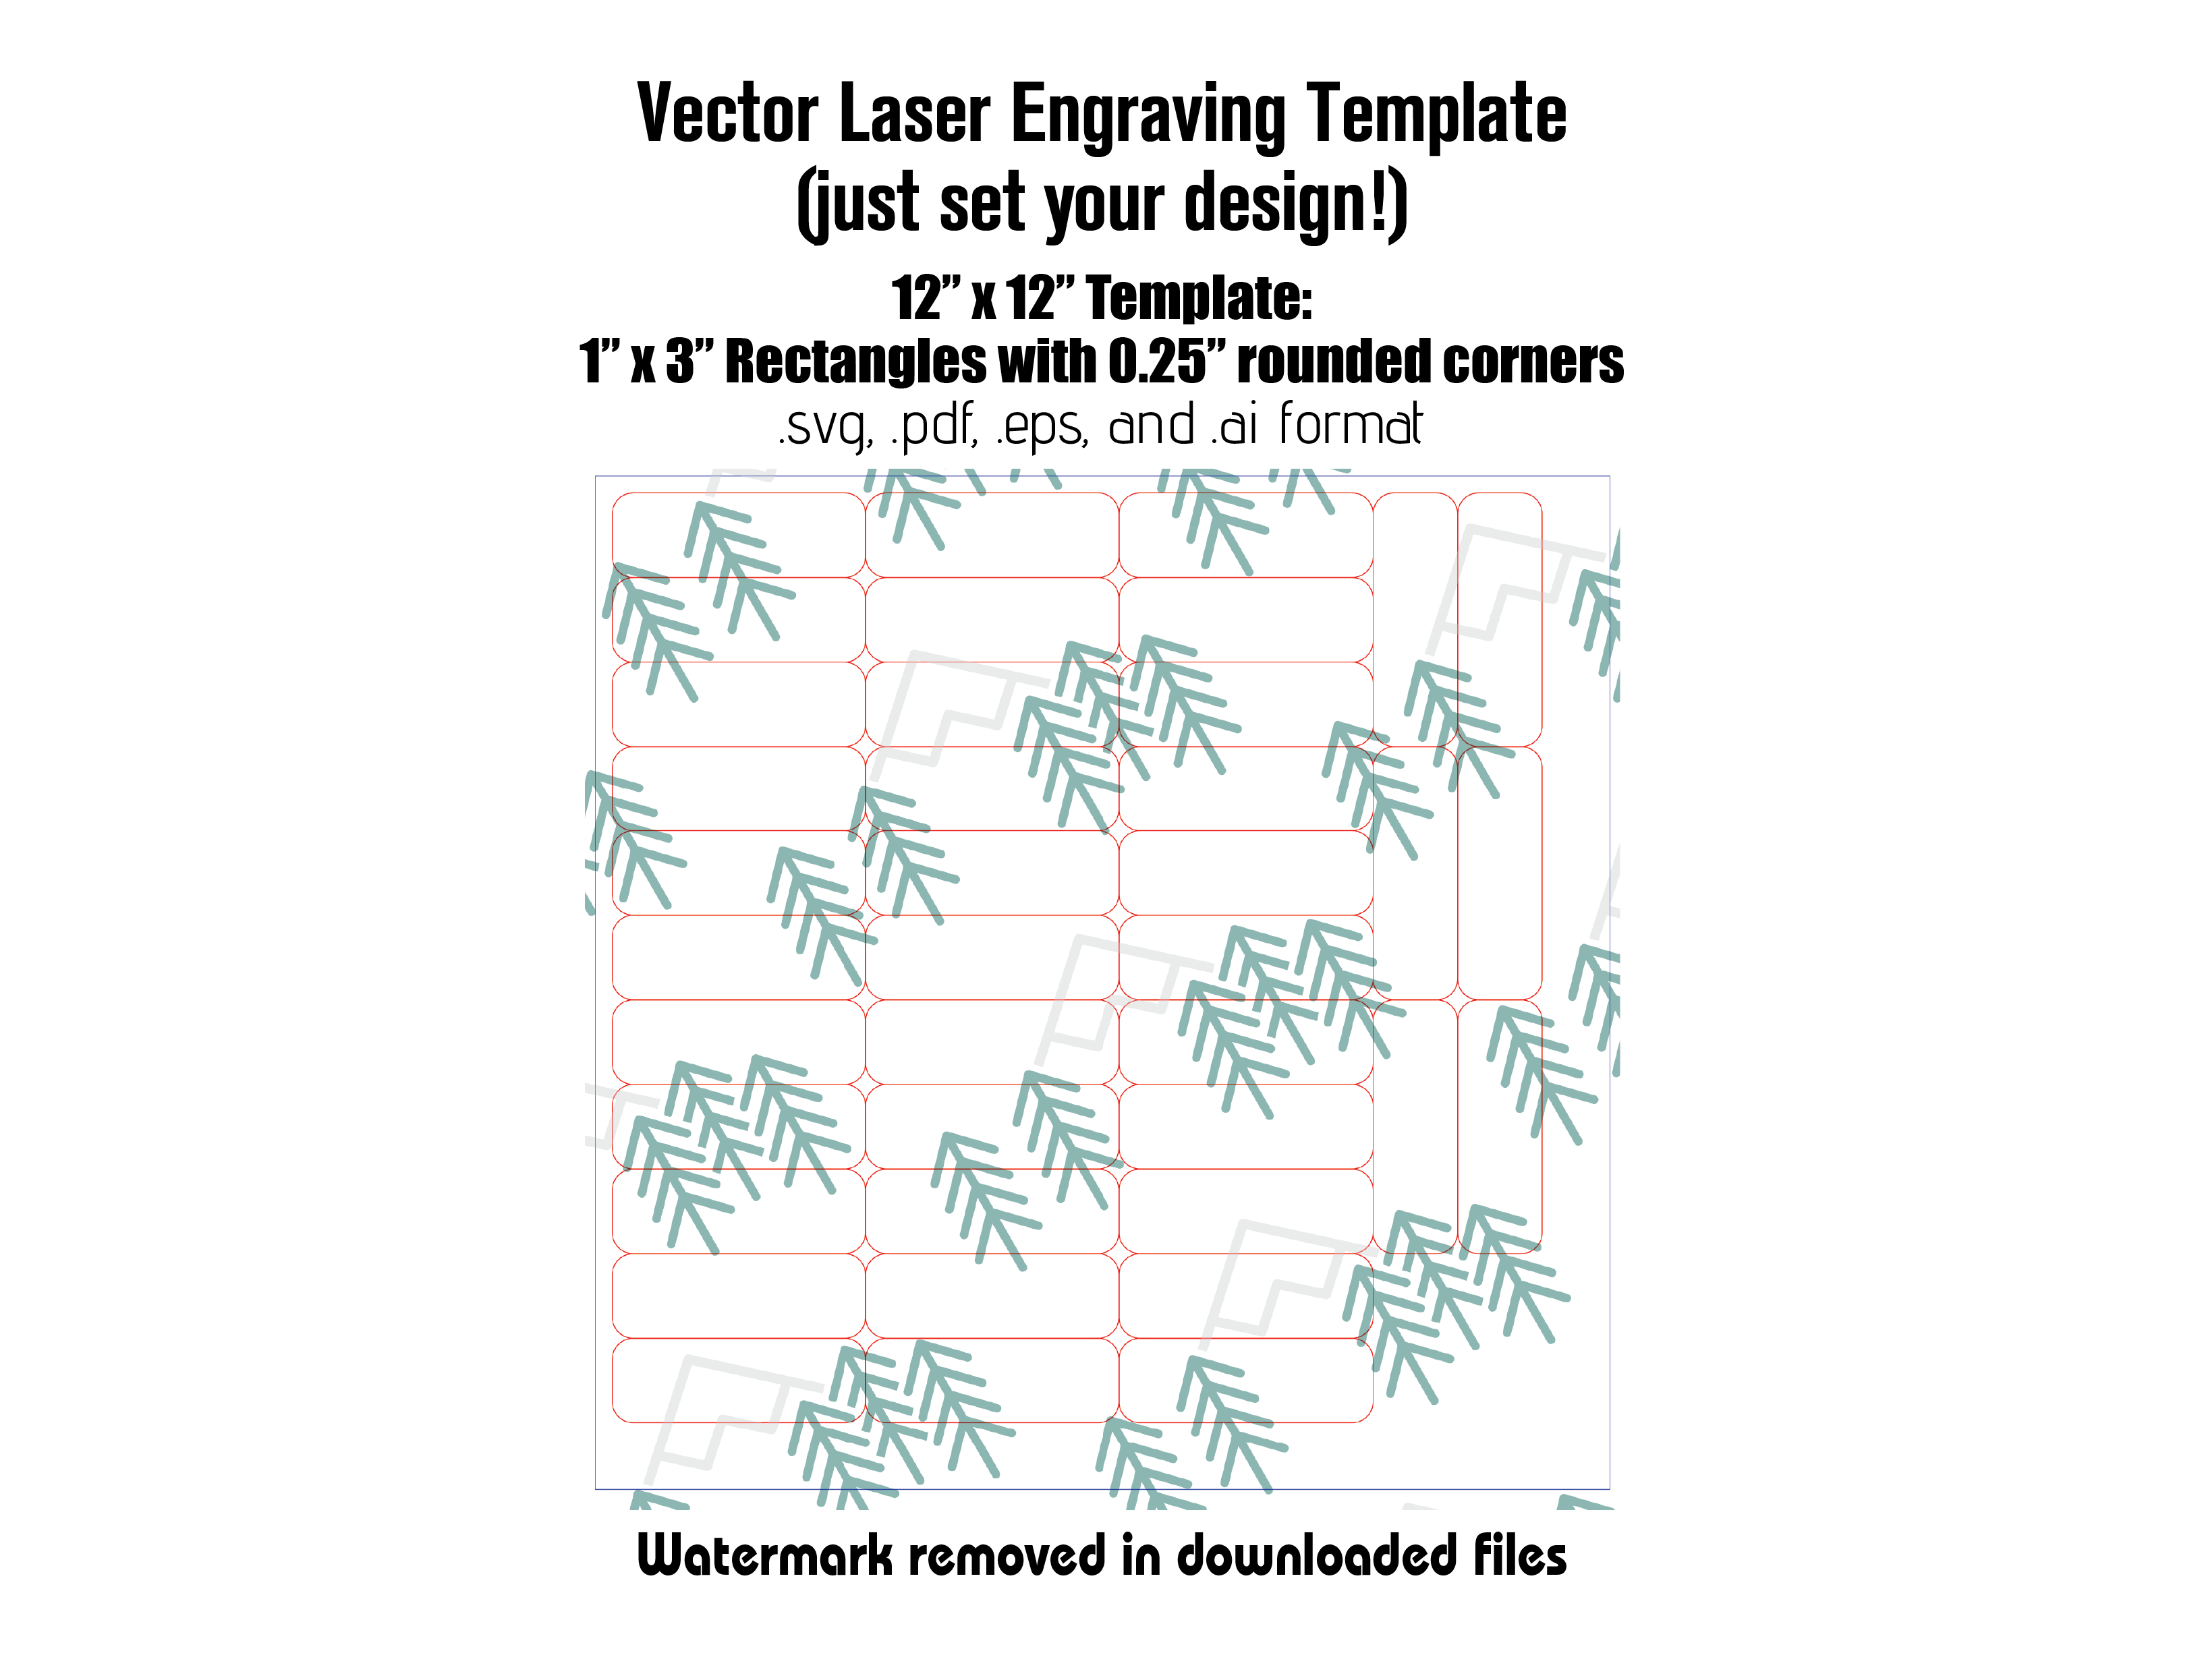 Digital Laser Cutting Template: 1" x 3" Rectangles w/Rounded Corners - 12" x 12" Sheet Size Digital Laser Engraving Files Craftworks NW 